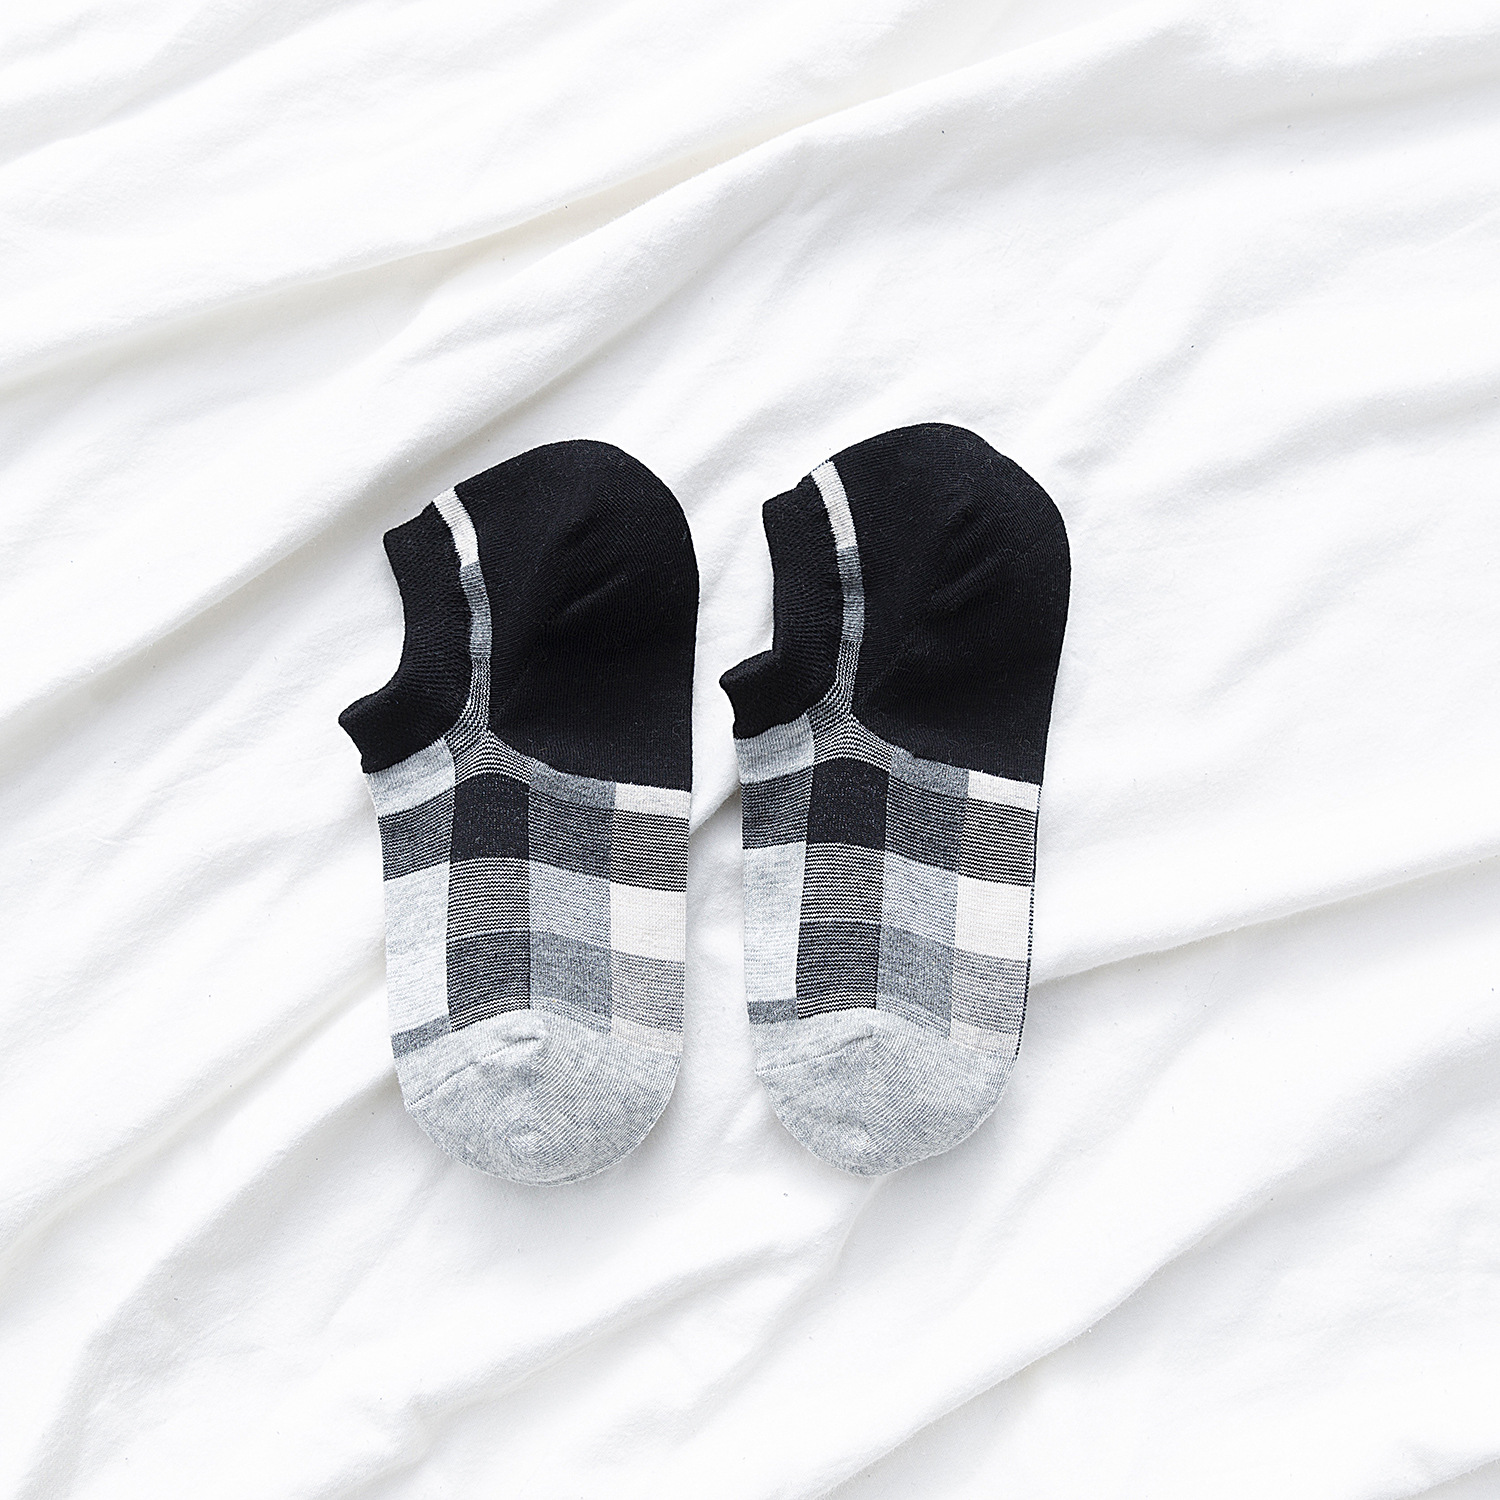 2020 Spring And Summer Ms. Cotton Socks Socks Department Of Wild Cotton Gradient Plaid Socks Female College Wind